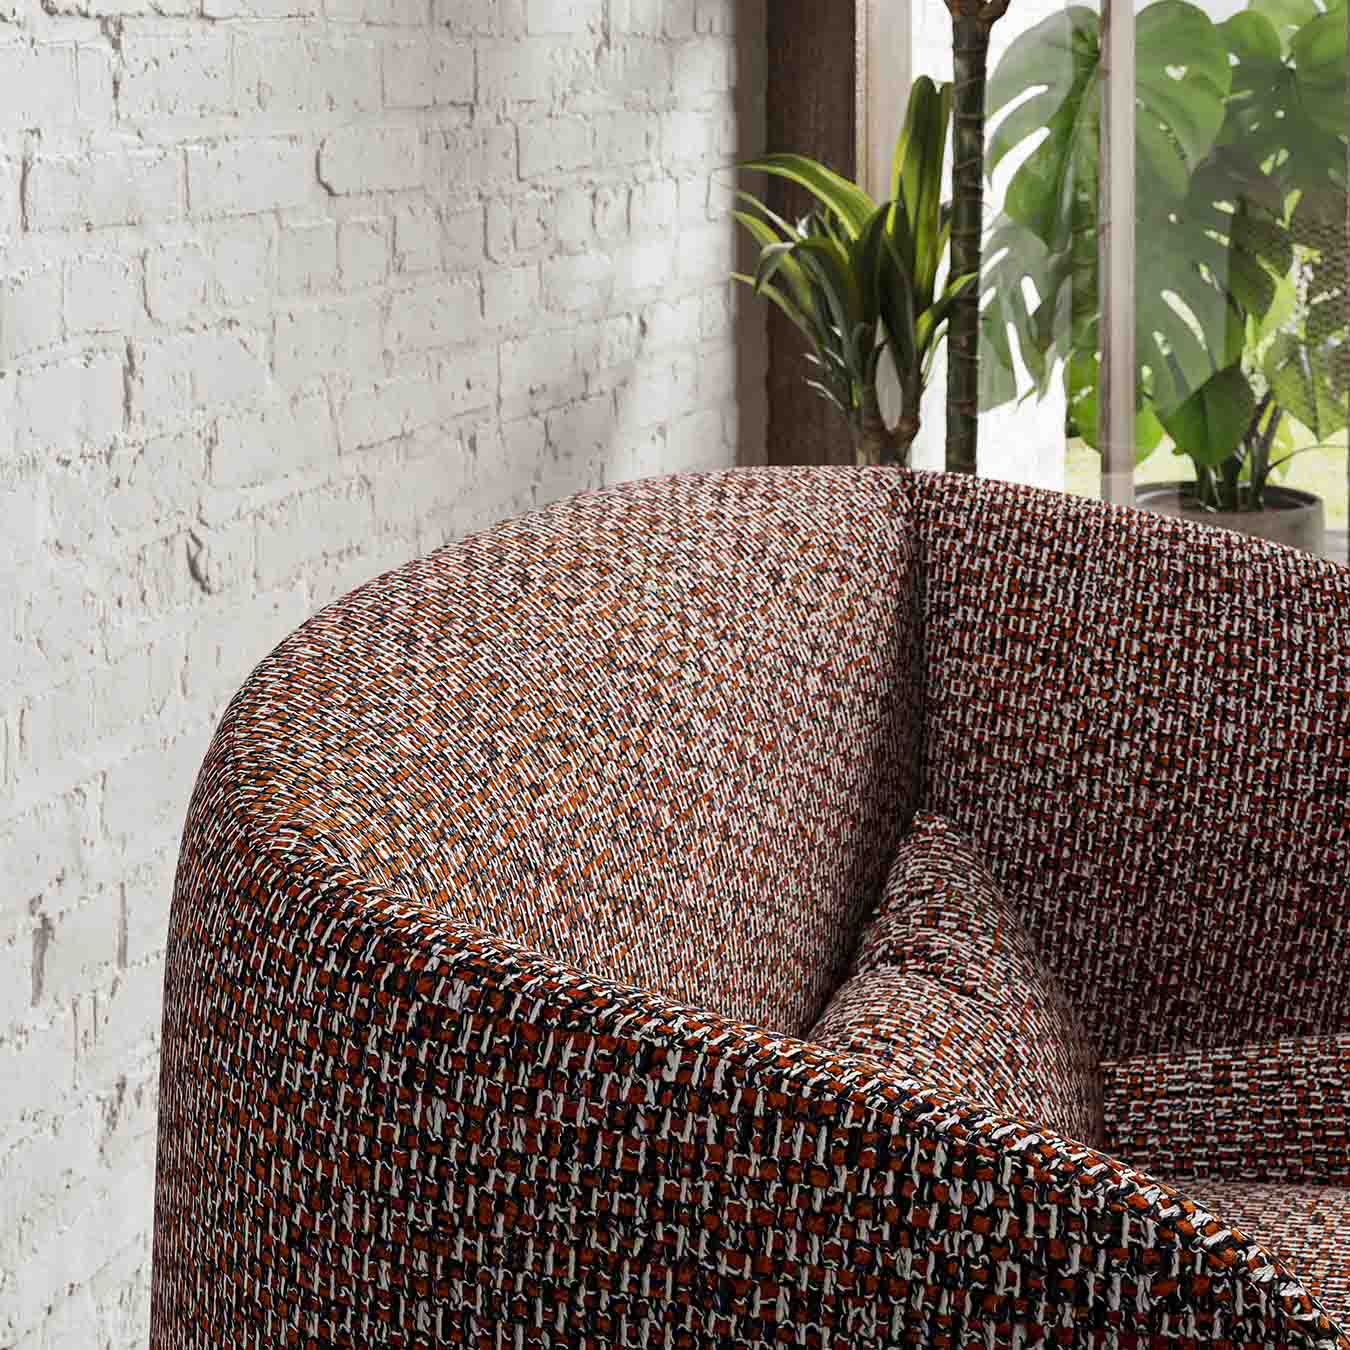 Liu Jo Living is set to present a new upholstered collection : DesignWanted